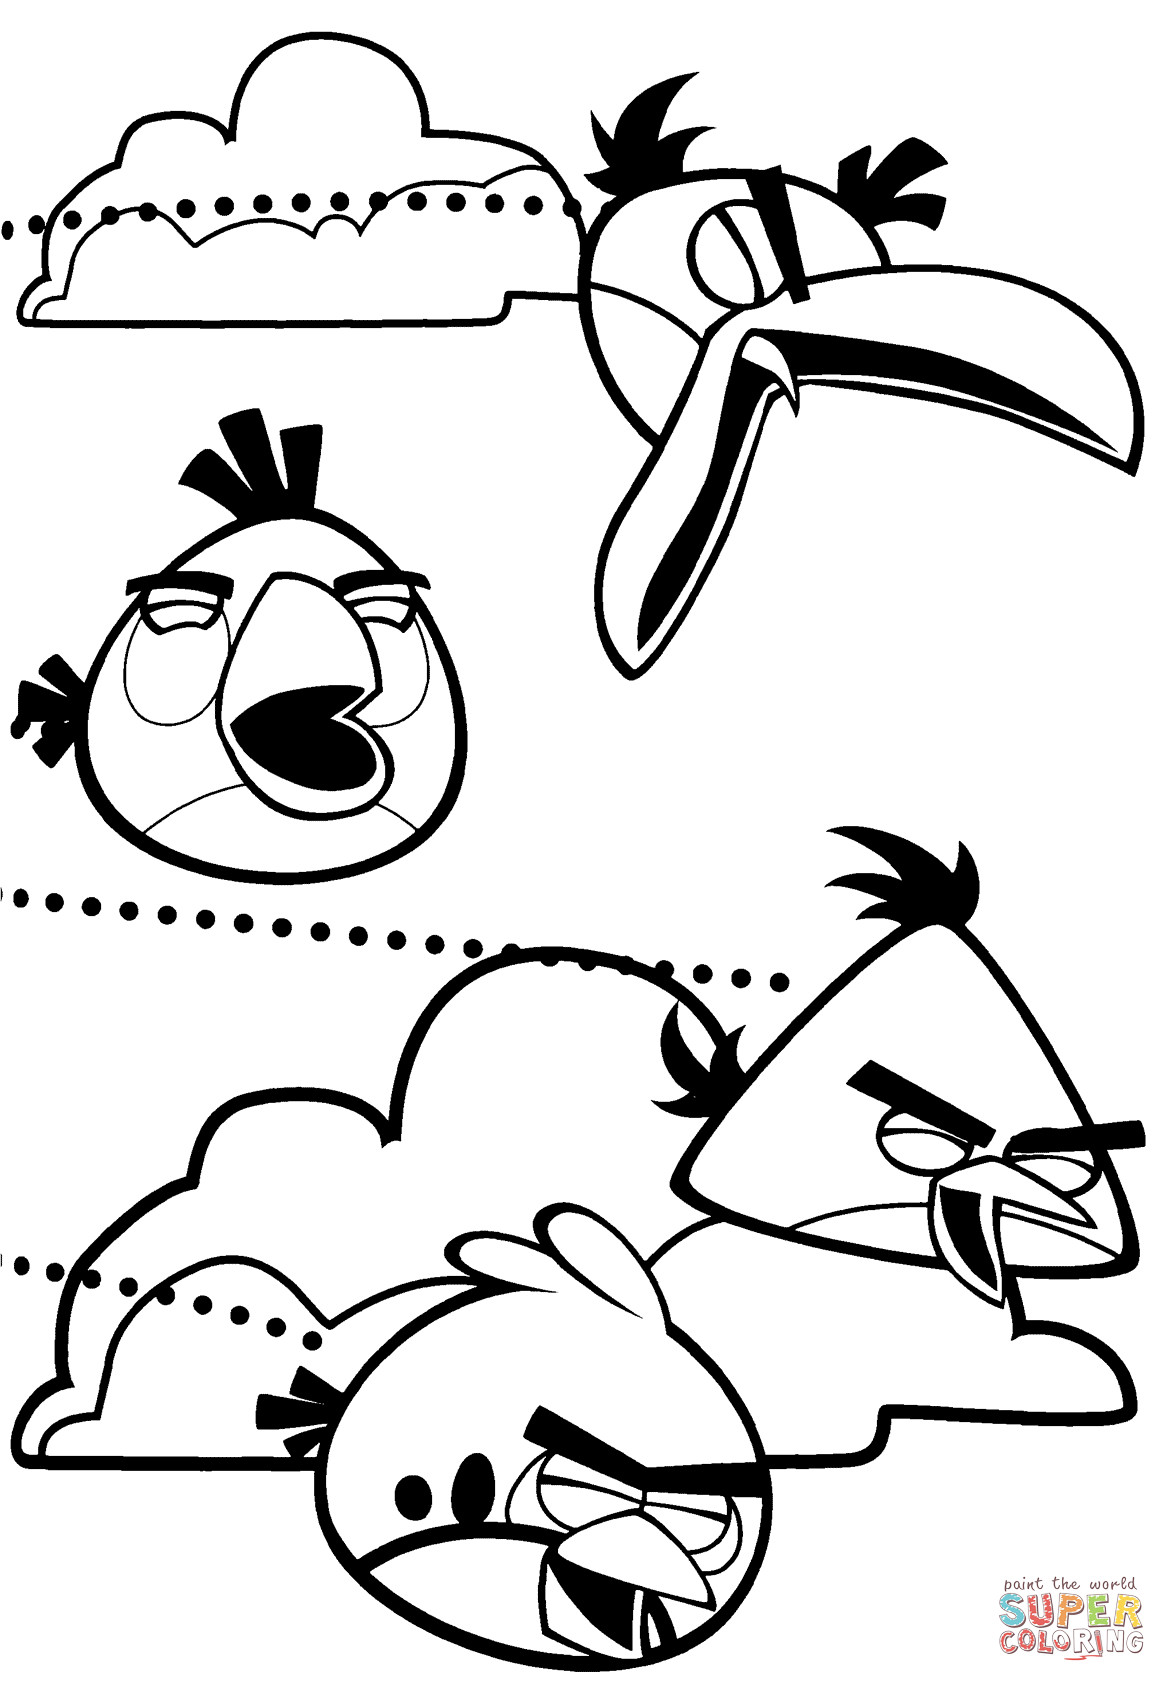 Angry Birds Coloring Pages
 Angry Birds Attack coloring page